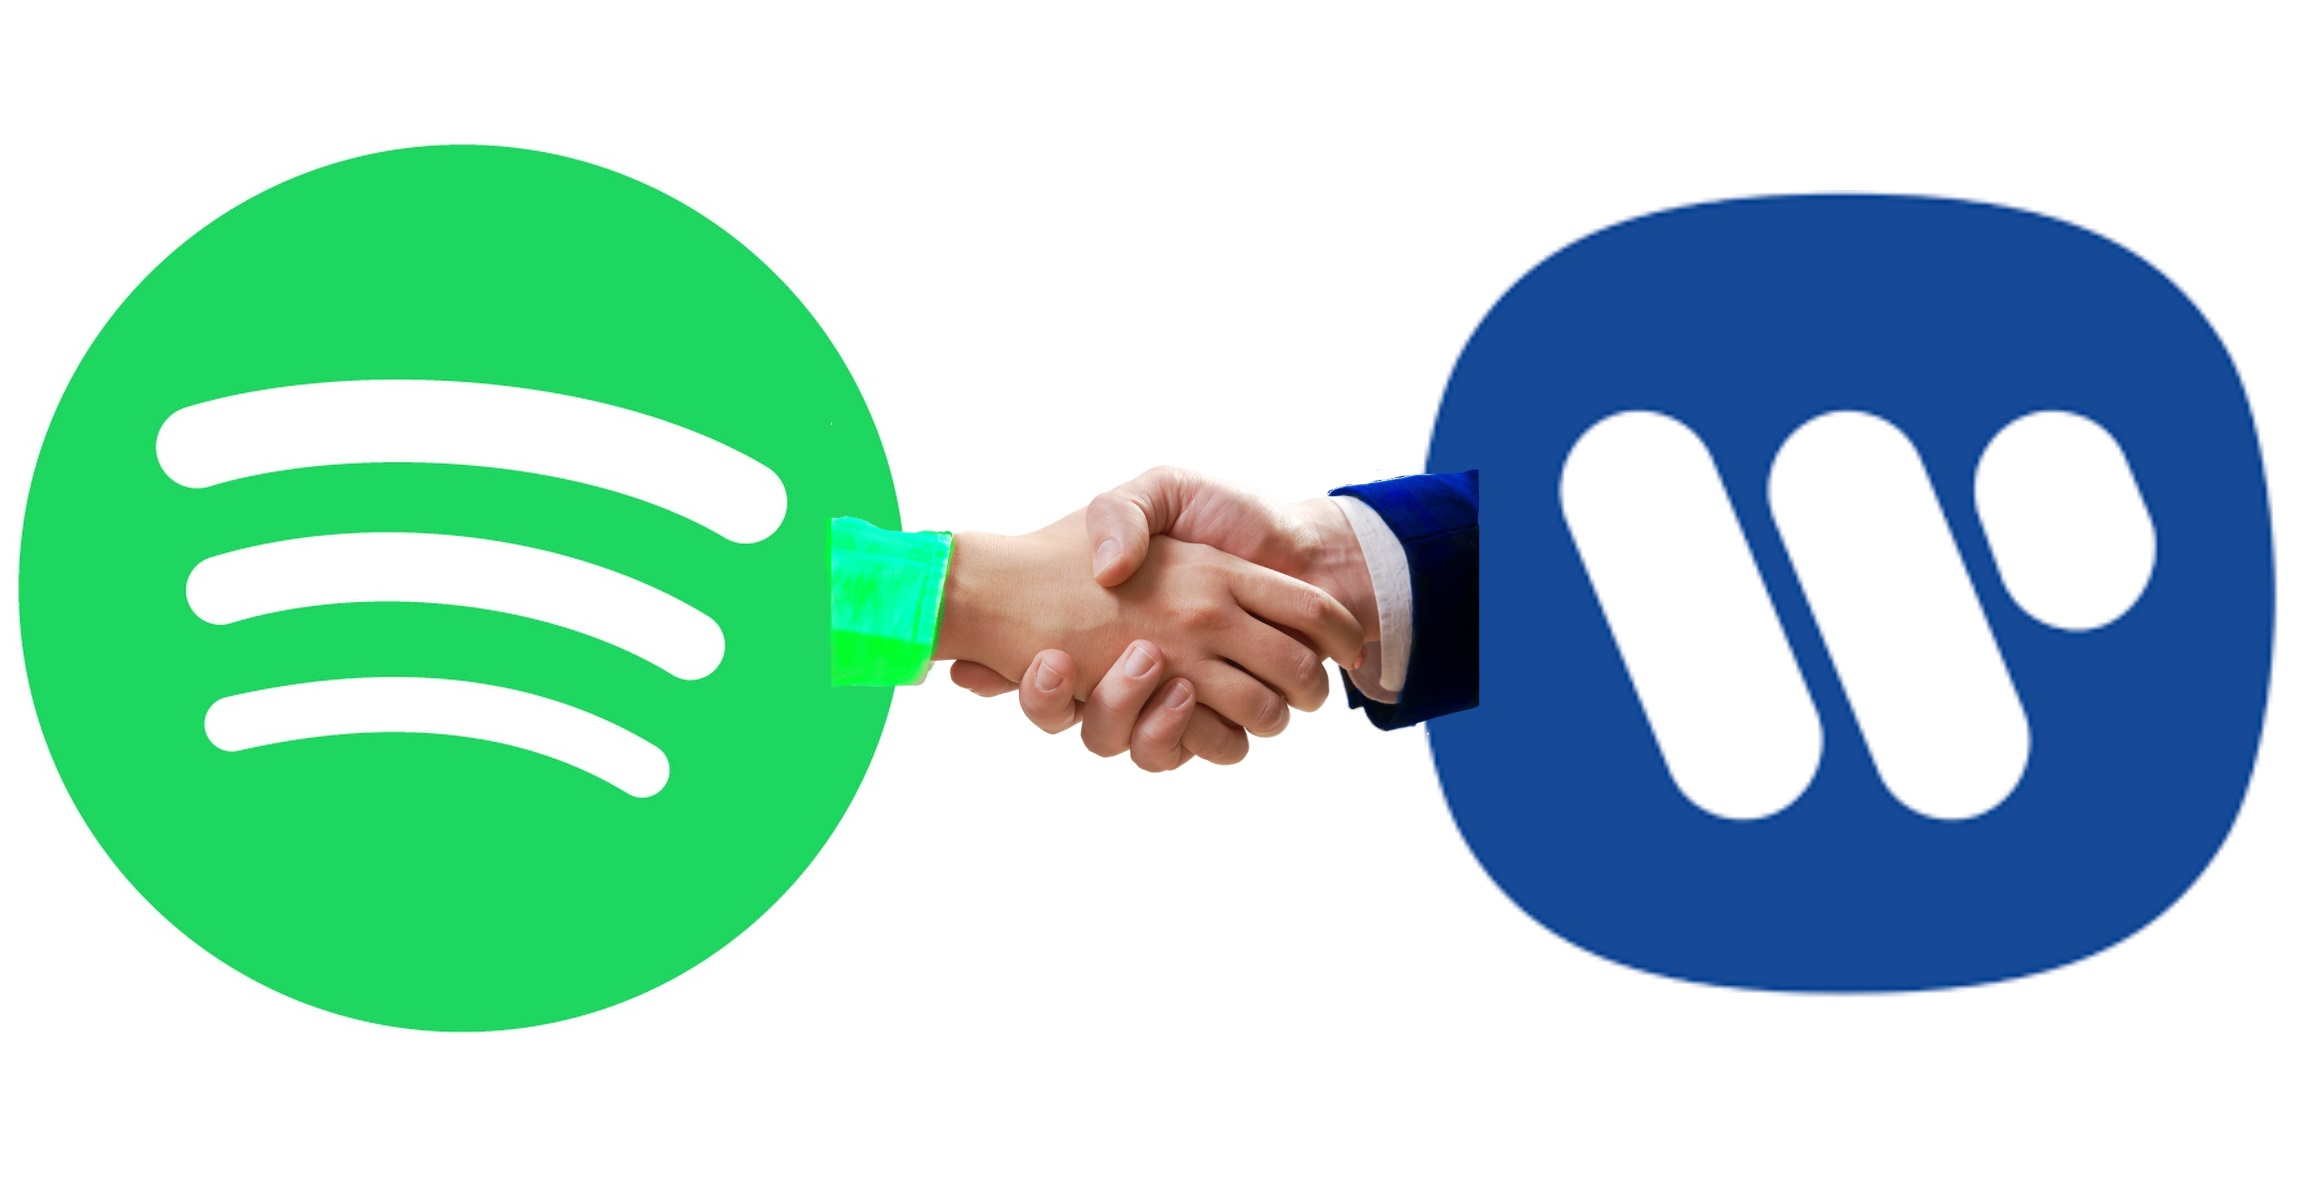 Spotify just signed a deal with Warner, all 3 majors now sorted for streaming